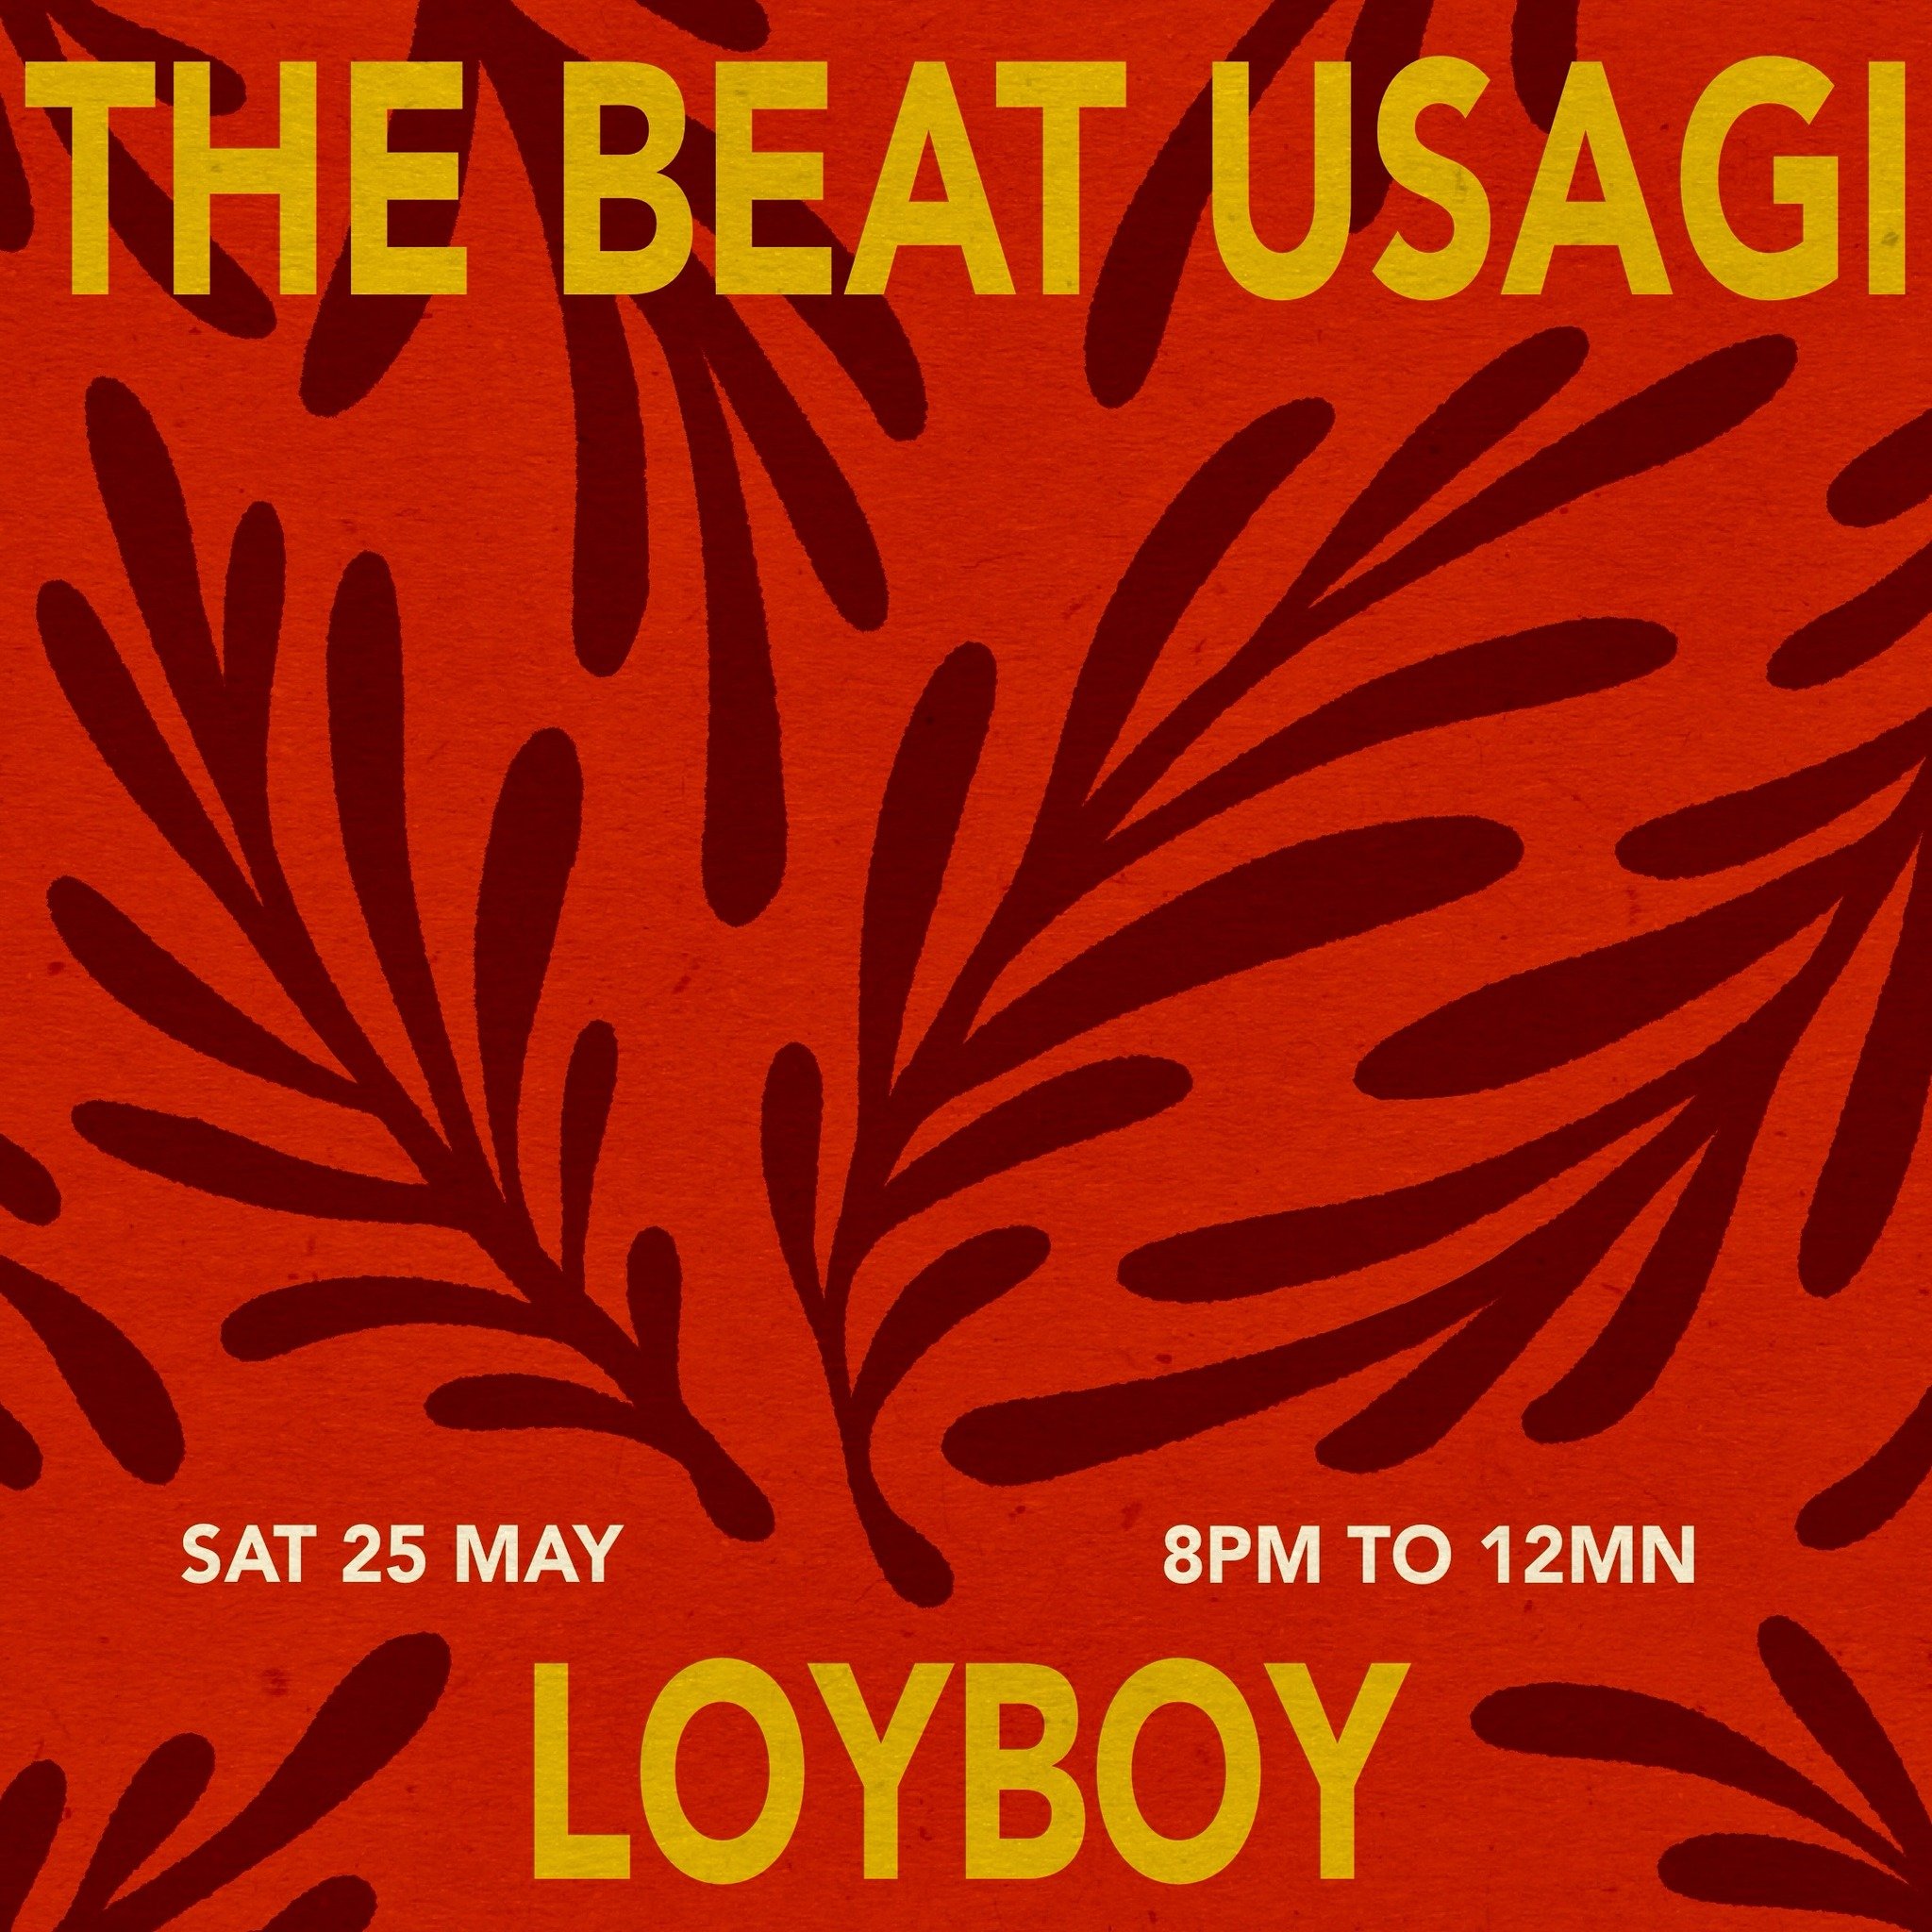 A frequent sighting at the clubs, this duo takes on a slightly mellower Saturday night warm up at Moonstone! 

The Beat Usagi&rsquo;s sound resembles a smorgasbord of genres. He salutes his origins by exploring his forte of techno, ranging from aggre